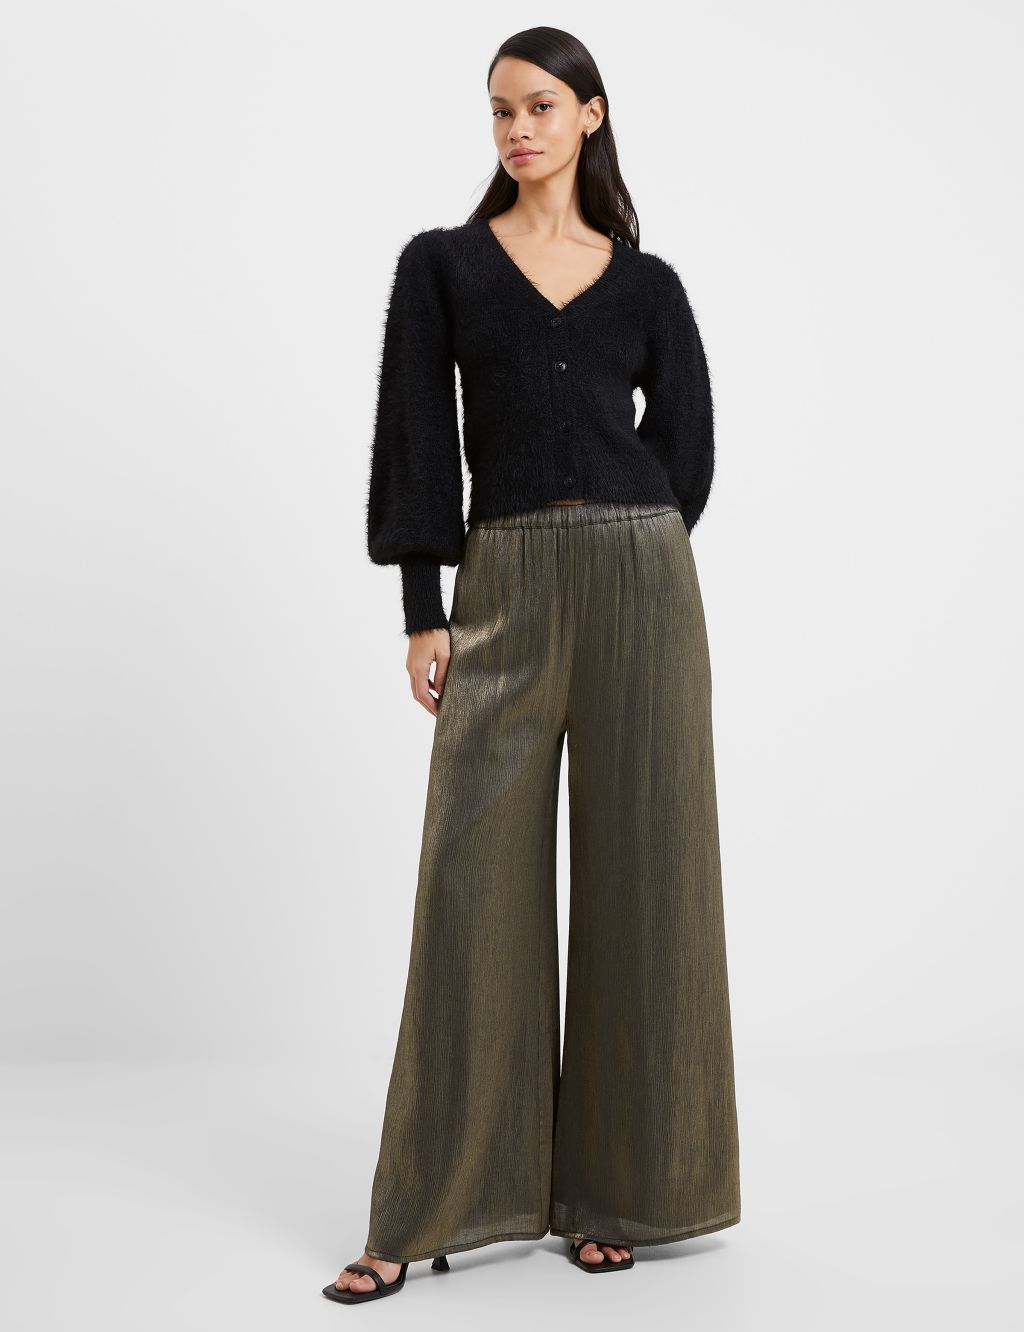 Sparkly Elasticated Waist Wide Leg Trousers image 1